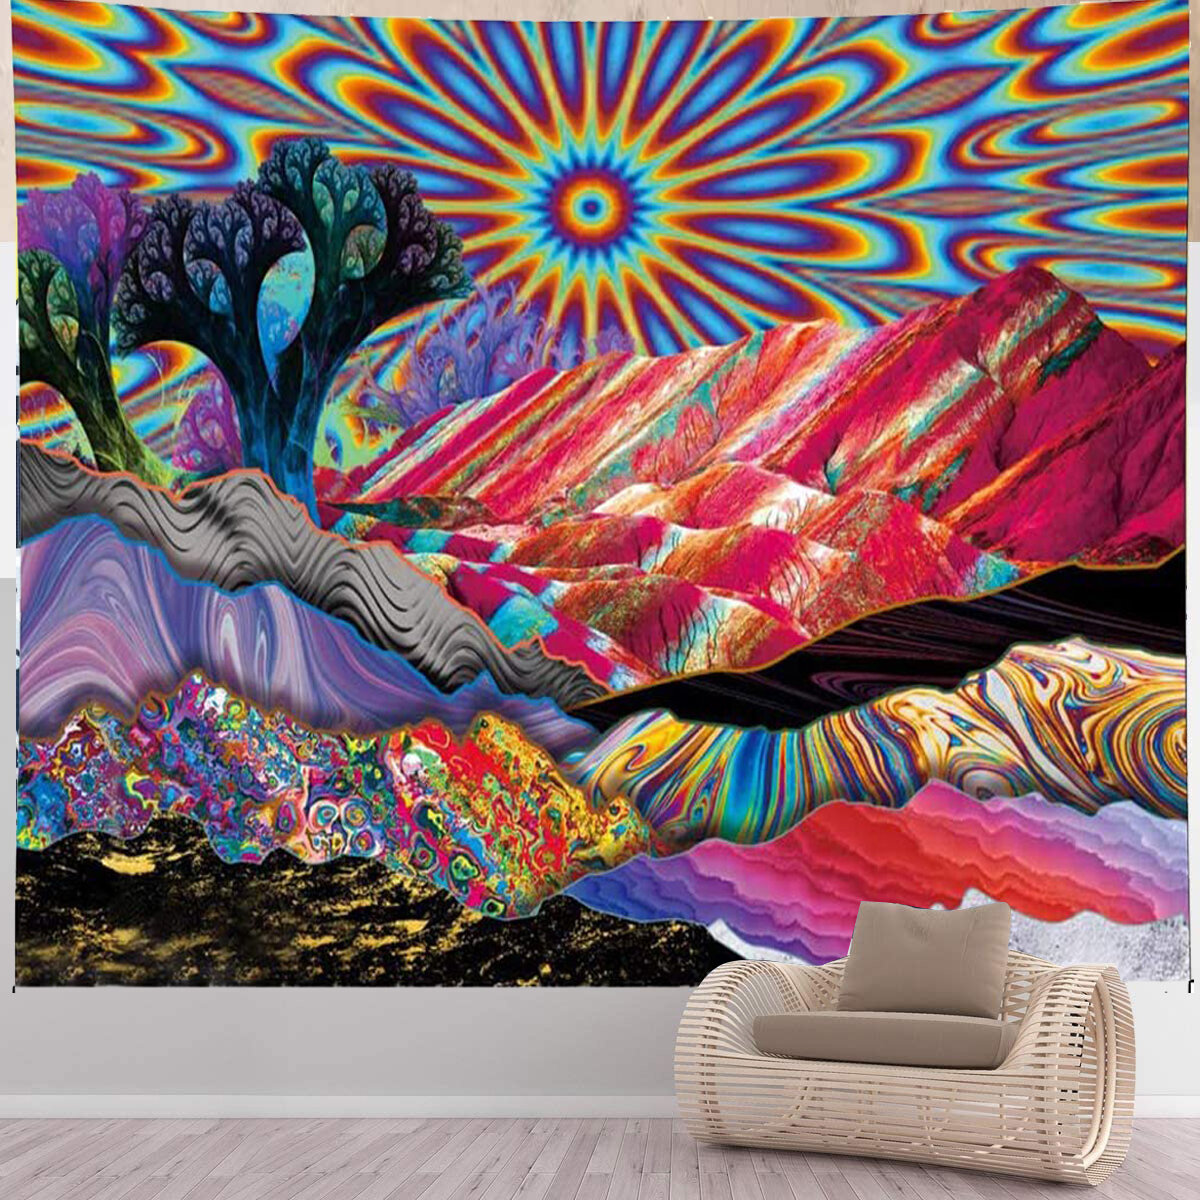 Abstract Oil Wall Blanket Mount Fuji Colorful Nature Landscape Hanging Tapestry Home Living Room Bed